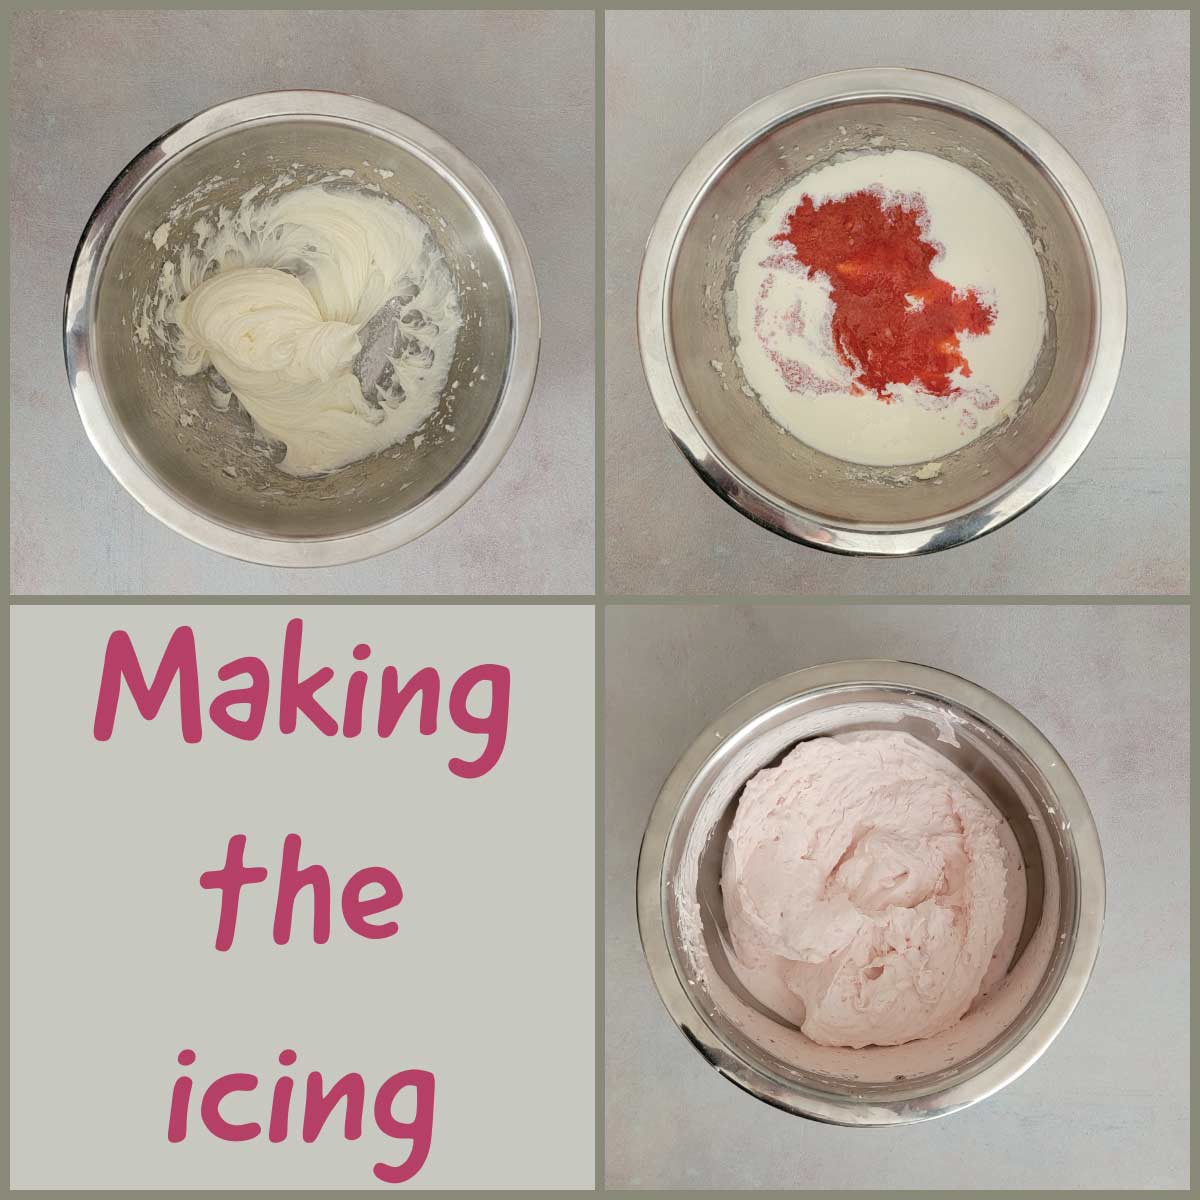 Making the icing steps - the cream cheese and powdered sugar creamed together, adding the strawberries and heavy cream.